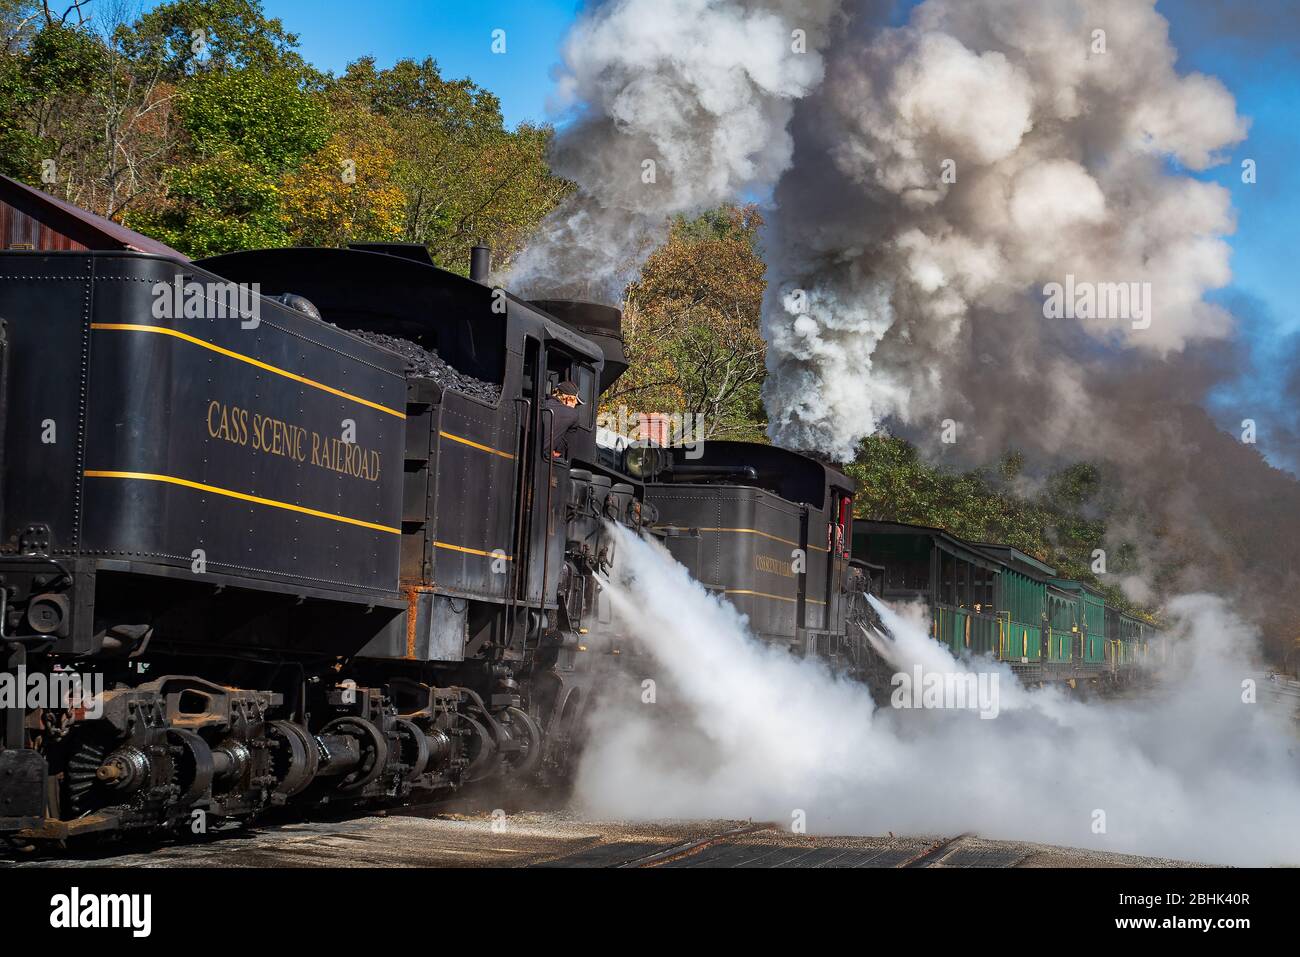 The large steam engine at Cass Scenic Railroad State Park in West Virginia releases large plumes of steam into the air before taking off from the stat Stock Photo